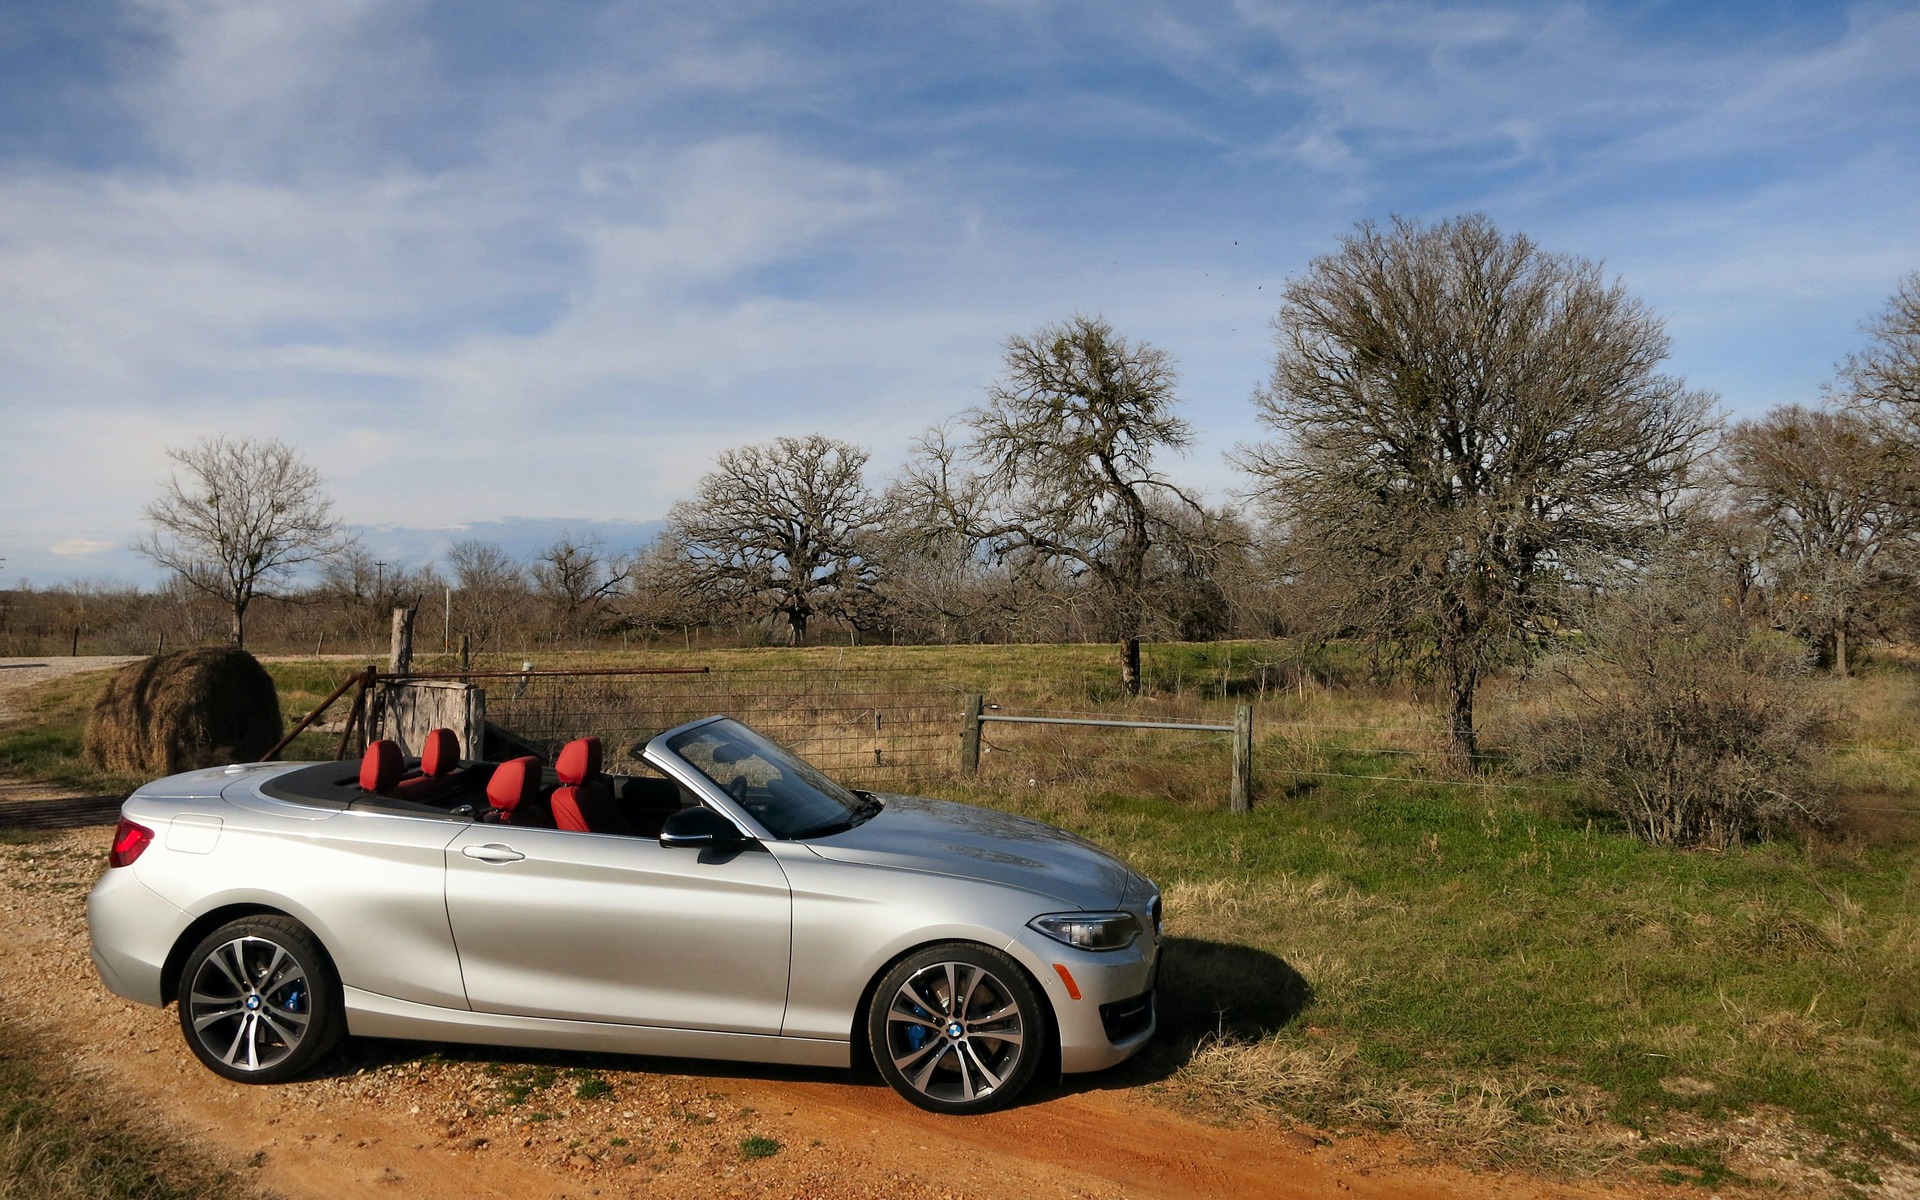 The 2015 BMW 2 Series Convertible plays to the automaker’s strengths.